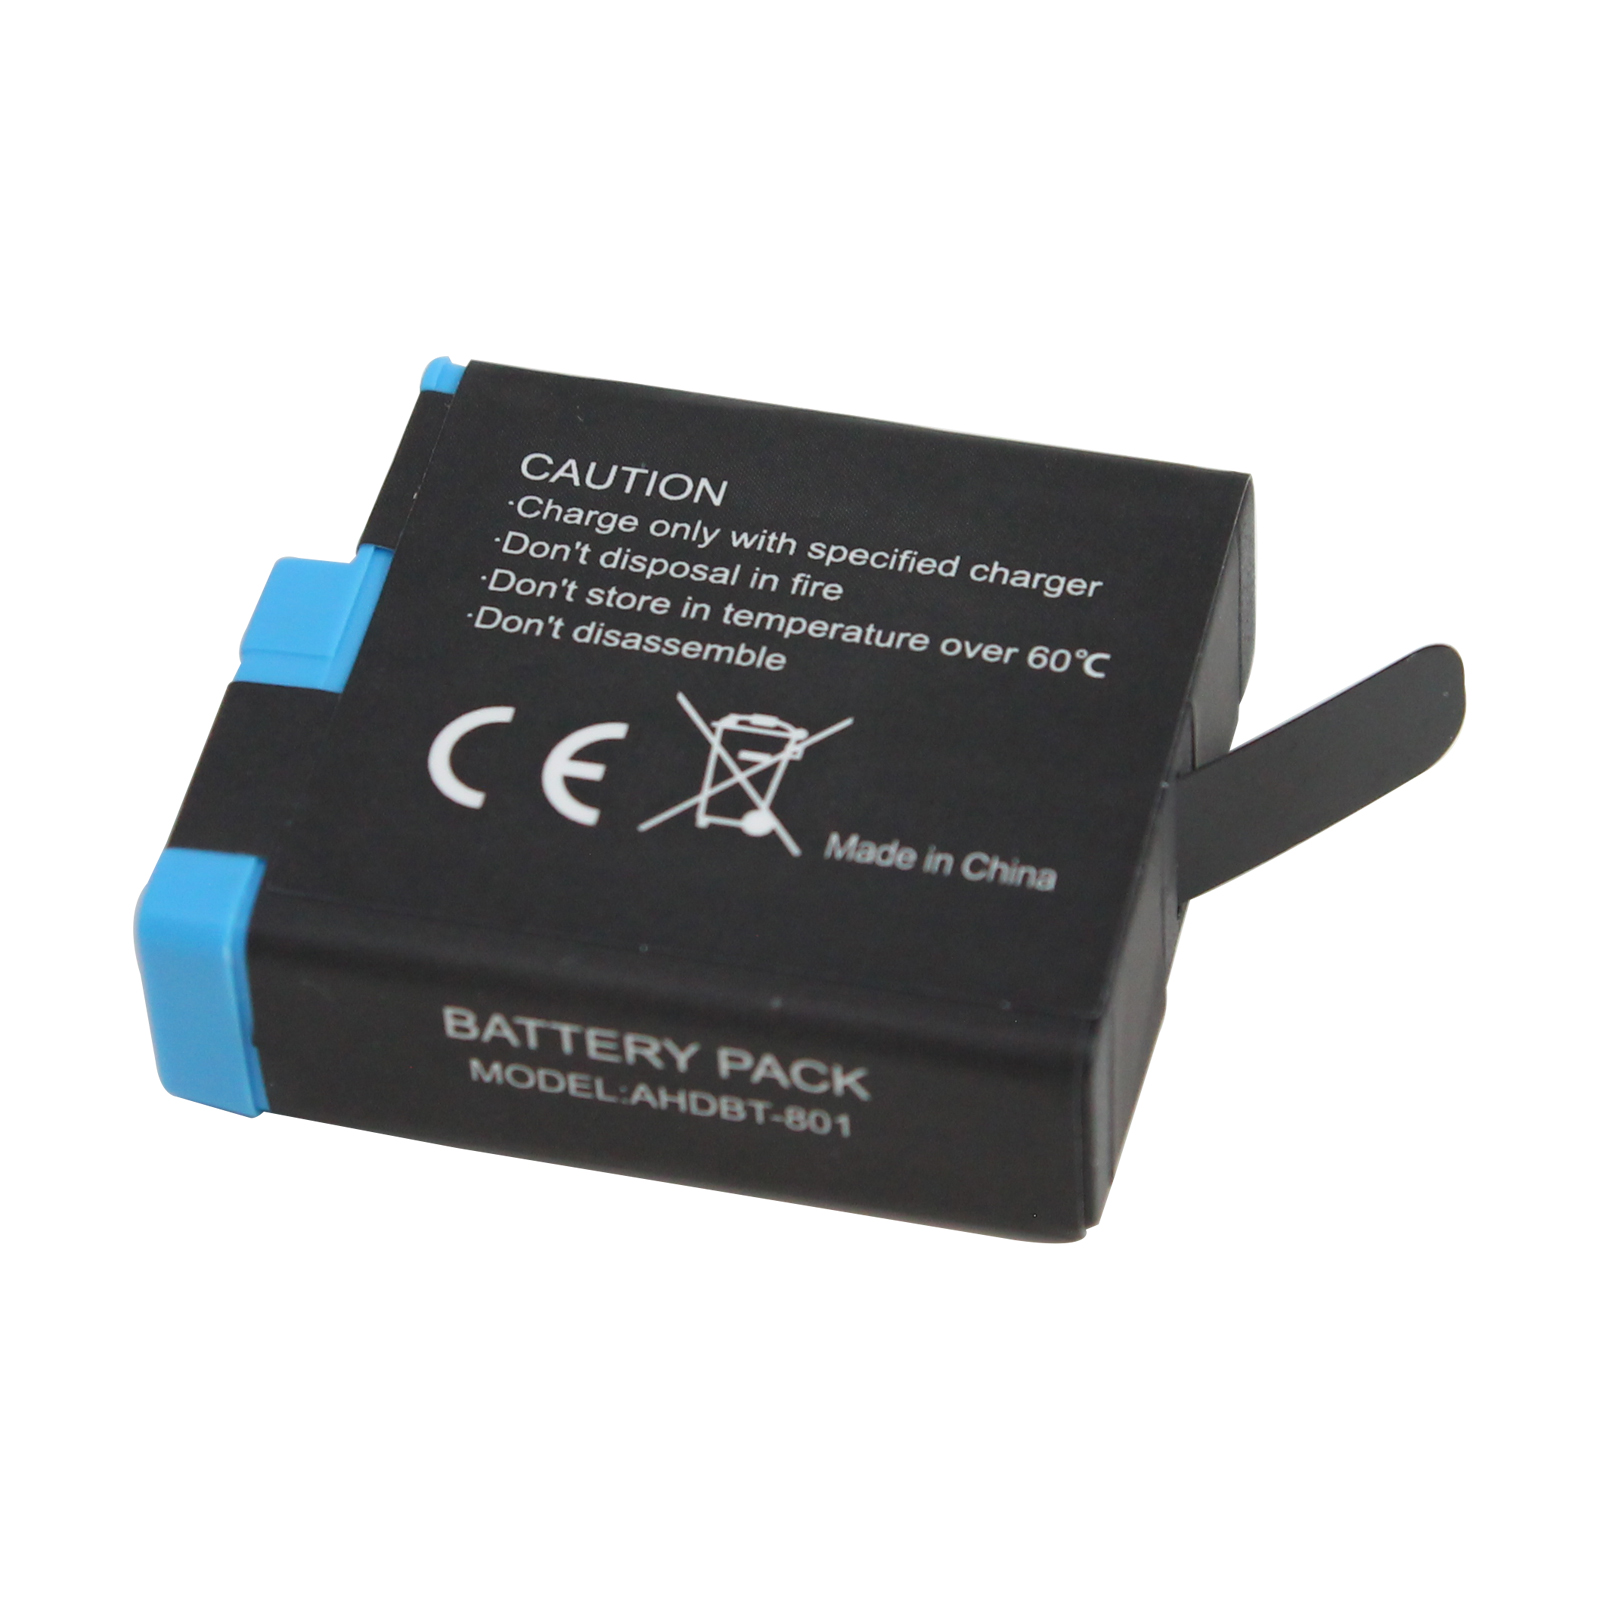 AHDBT-801 Battery Replacement for GoPro AHDBT-801 Camera - Compatible with SPJB1B Fully Decoded Battery - image 2 of 3